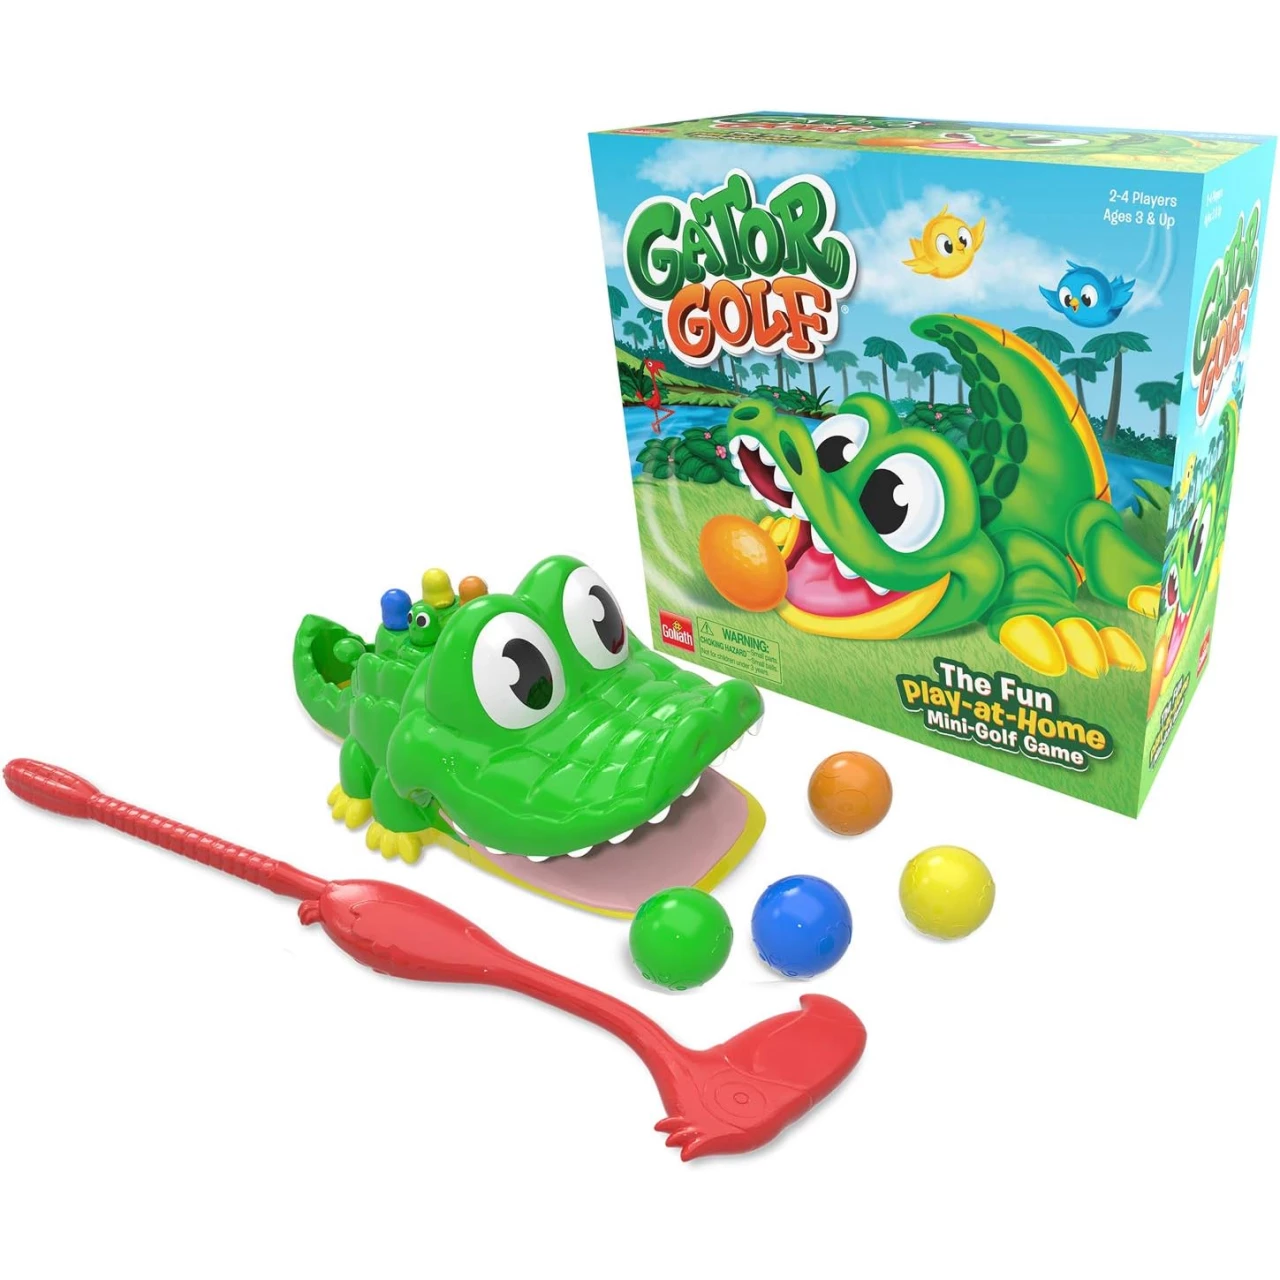 Gator Golf - Putt The Ball into The Gator&rsquo;s Mouth to Score Game by Goliath, Single, Gator Golf, 27 x 27 x 12.5 cm for age 3+ years